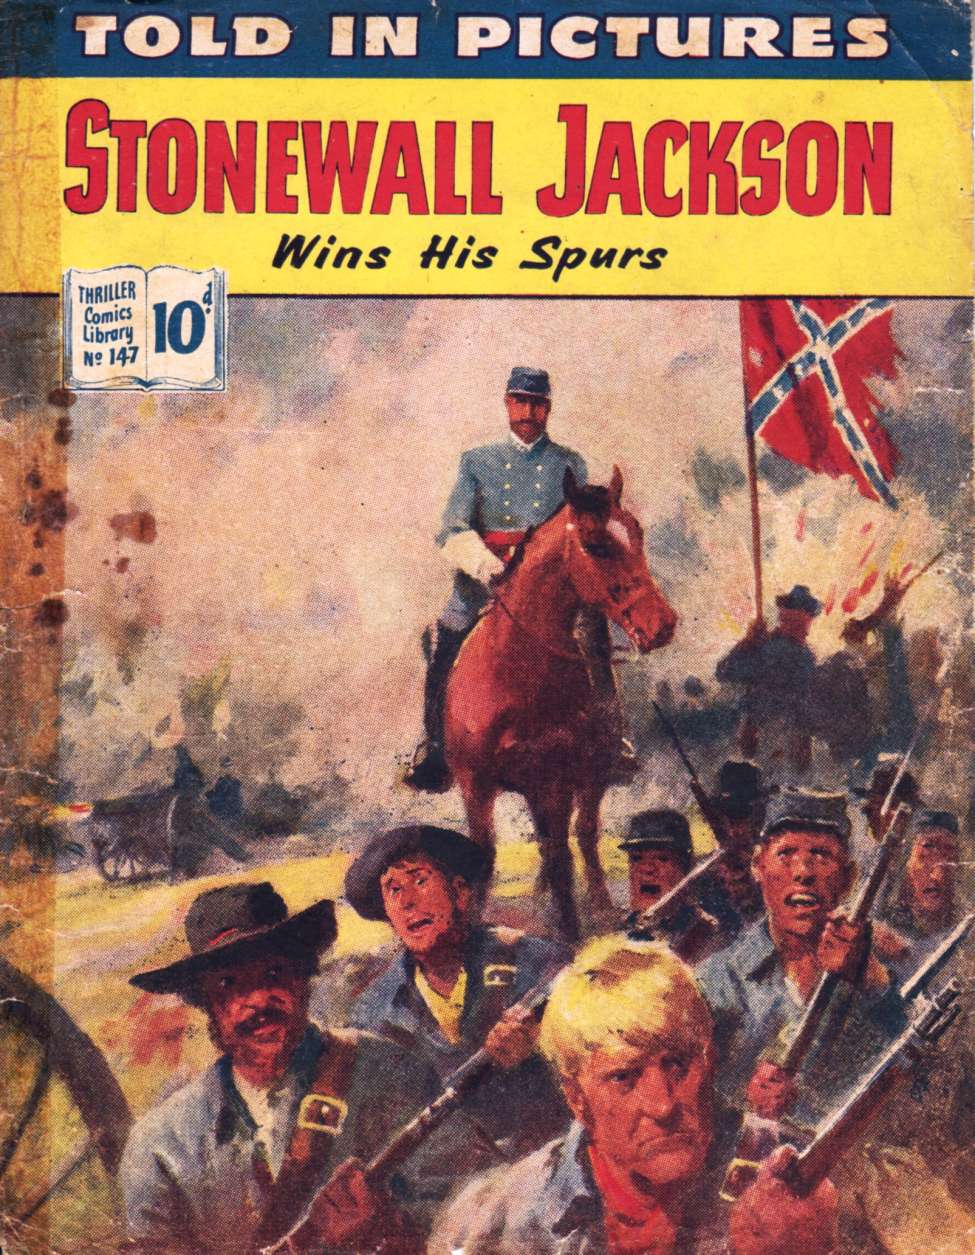 Comic Book Cover For Thriller Comics Library 147 - Stonewall Jackson Wins His Spurs